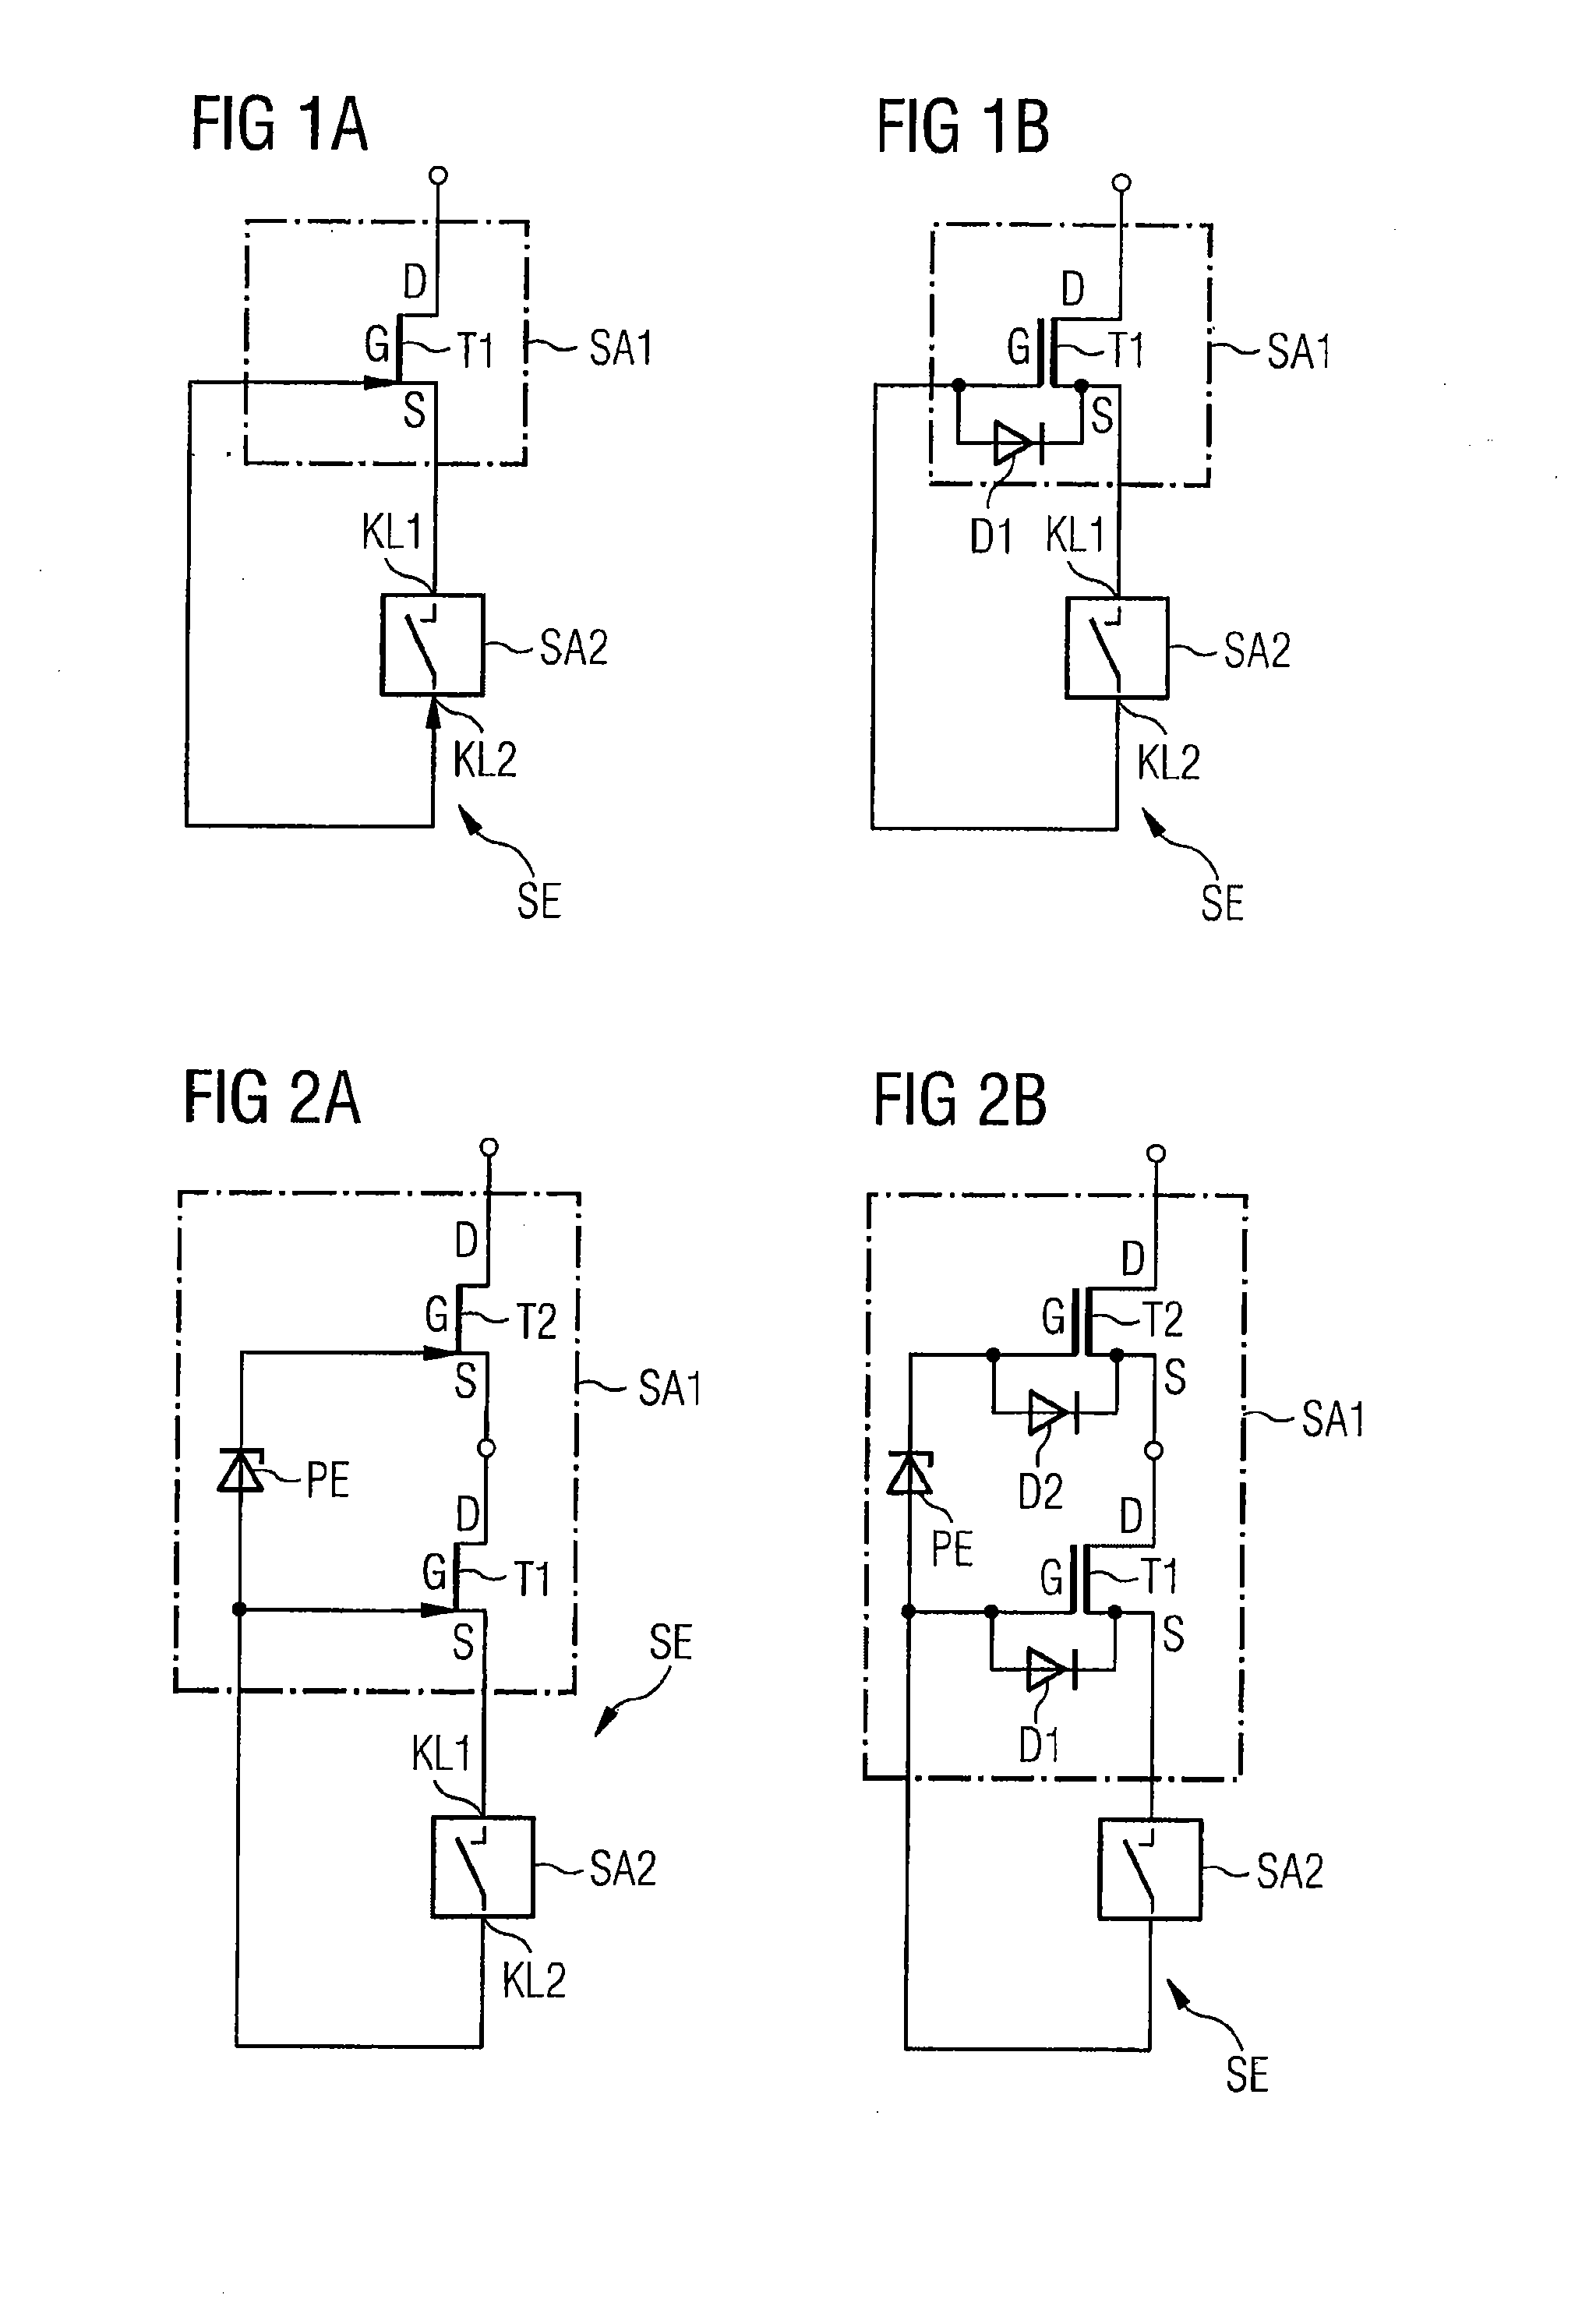 Switching device and switching arrangements for switching at high operating voltage